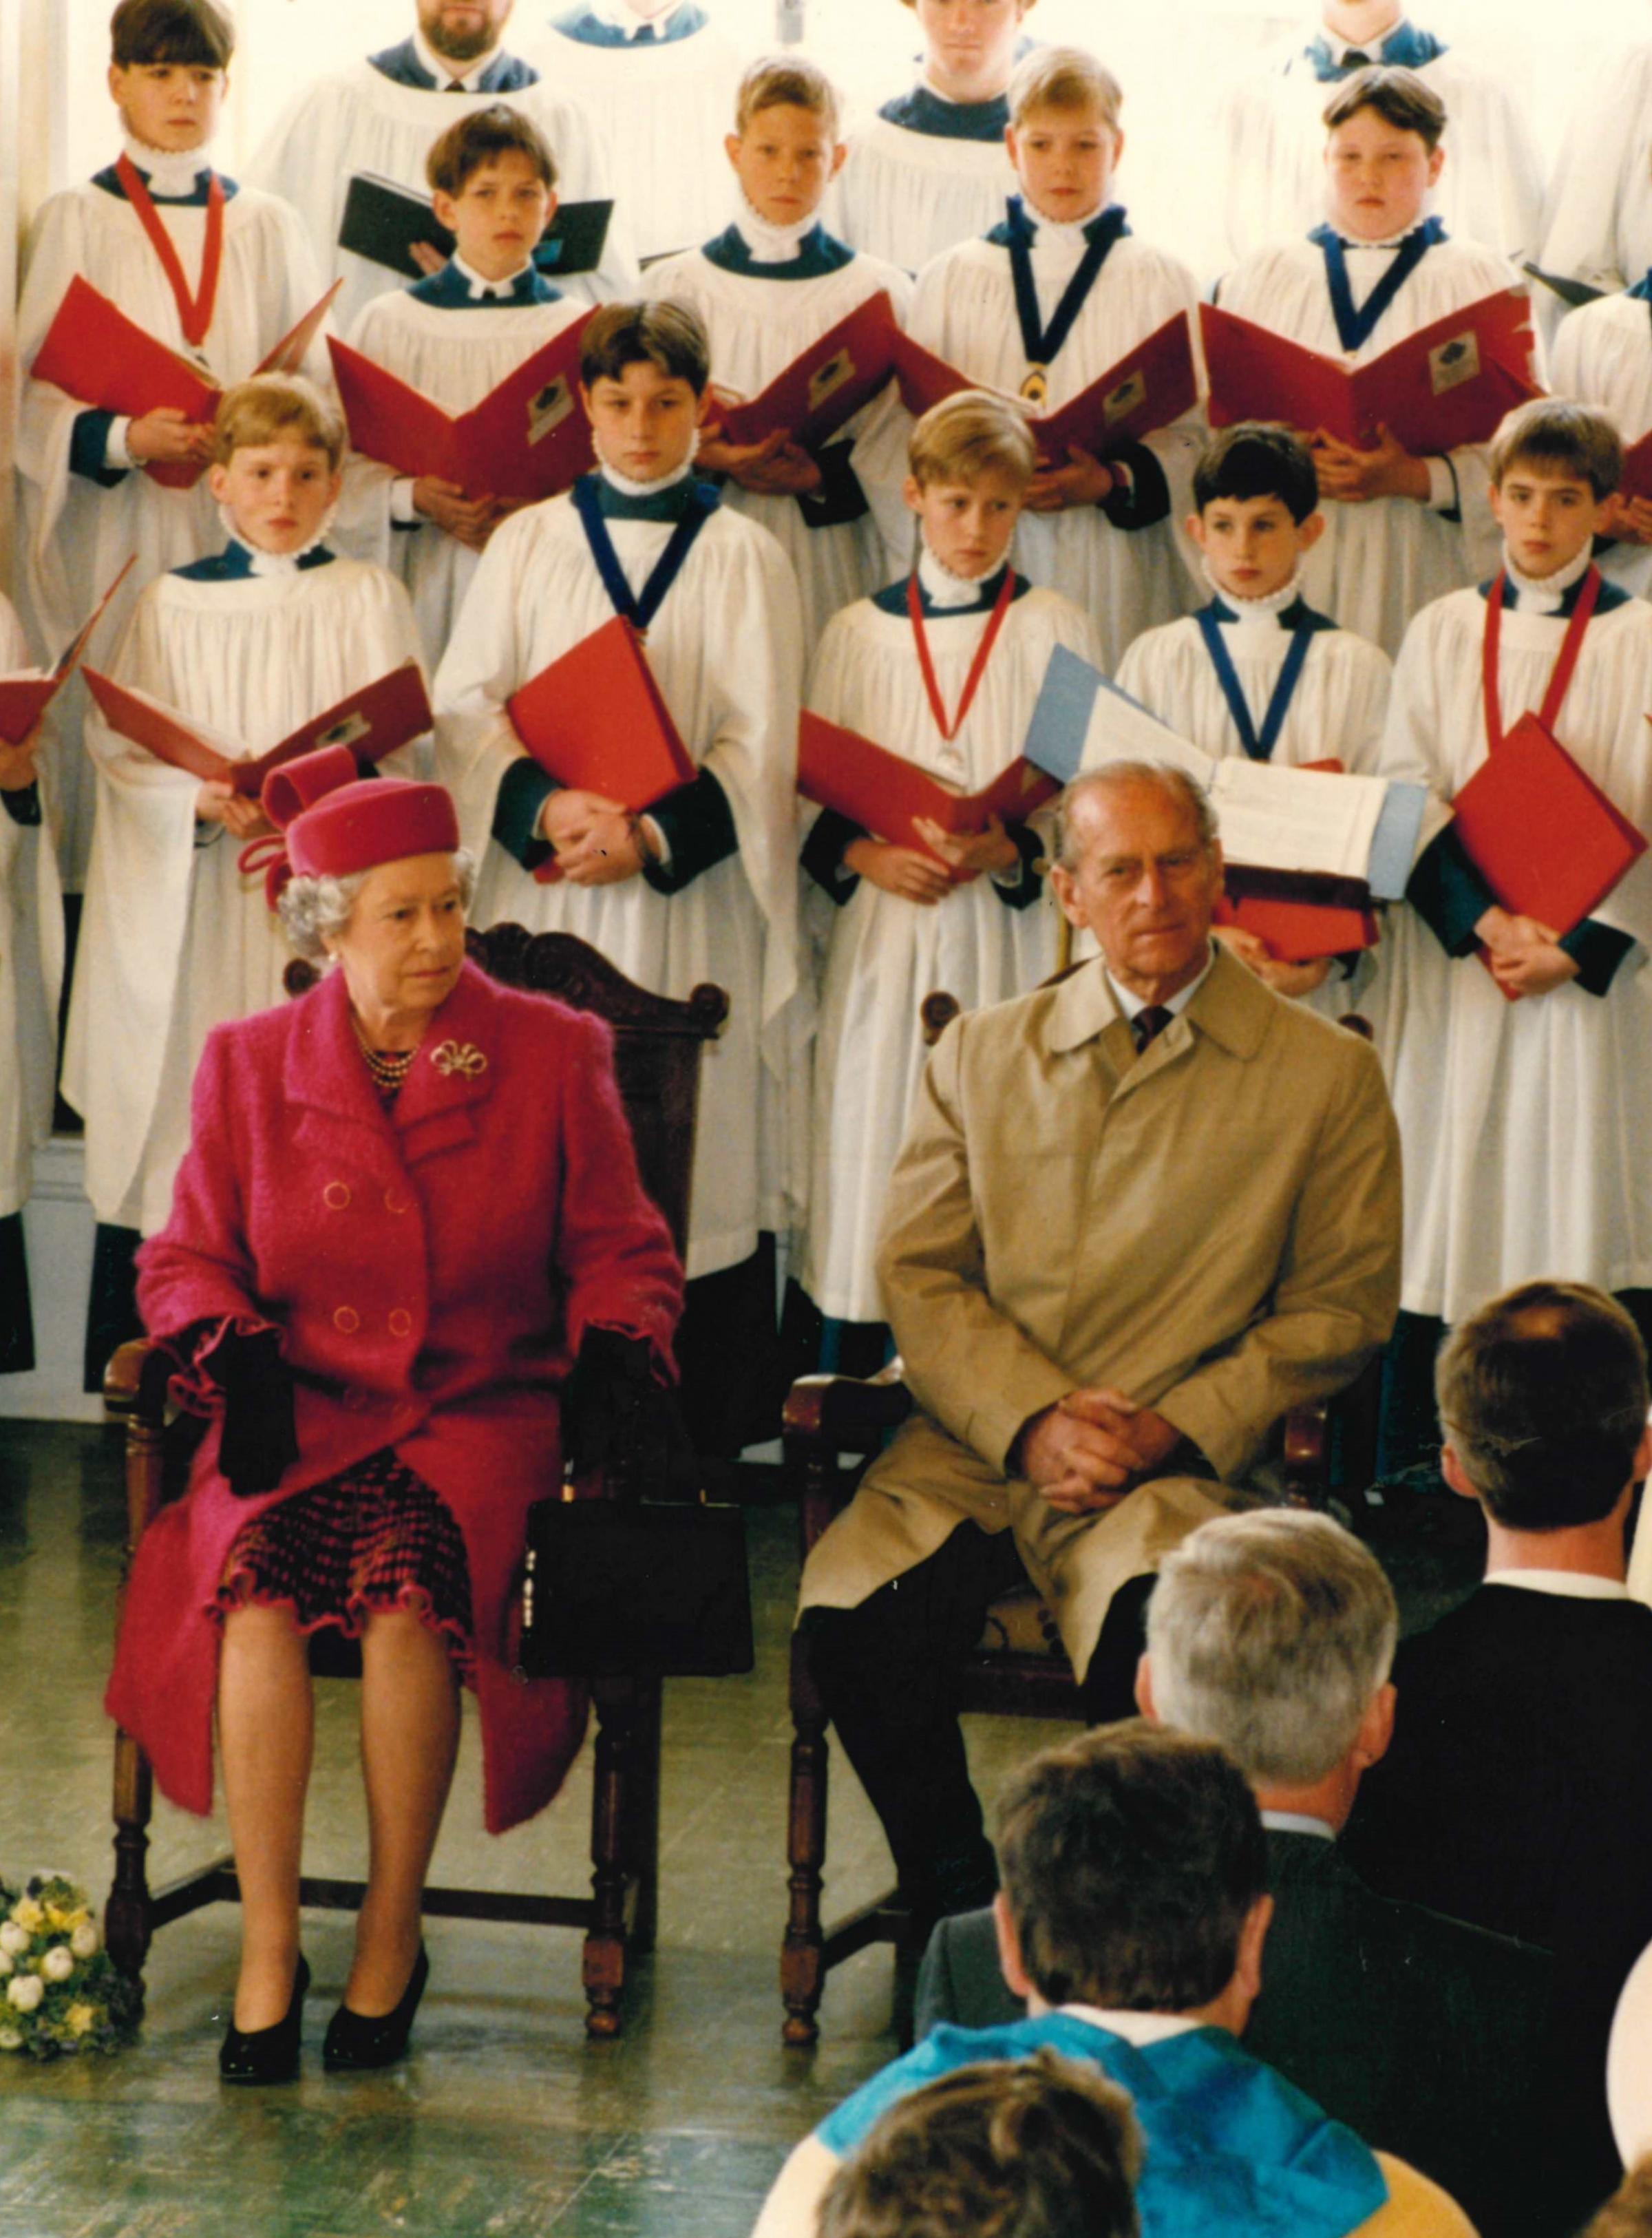 The Queen sits alongside Prince Philip during a visit